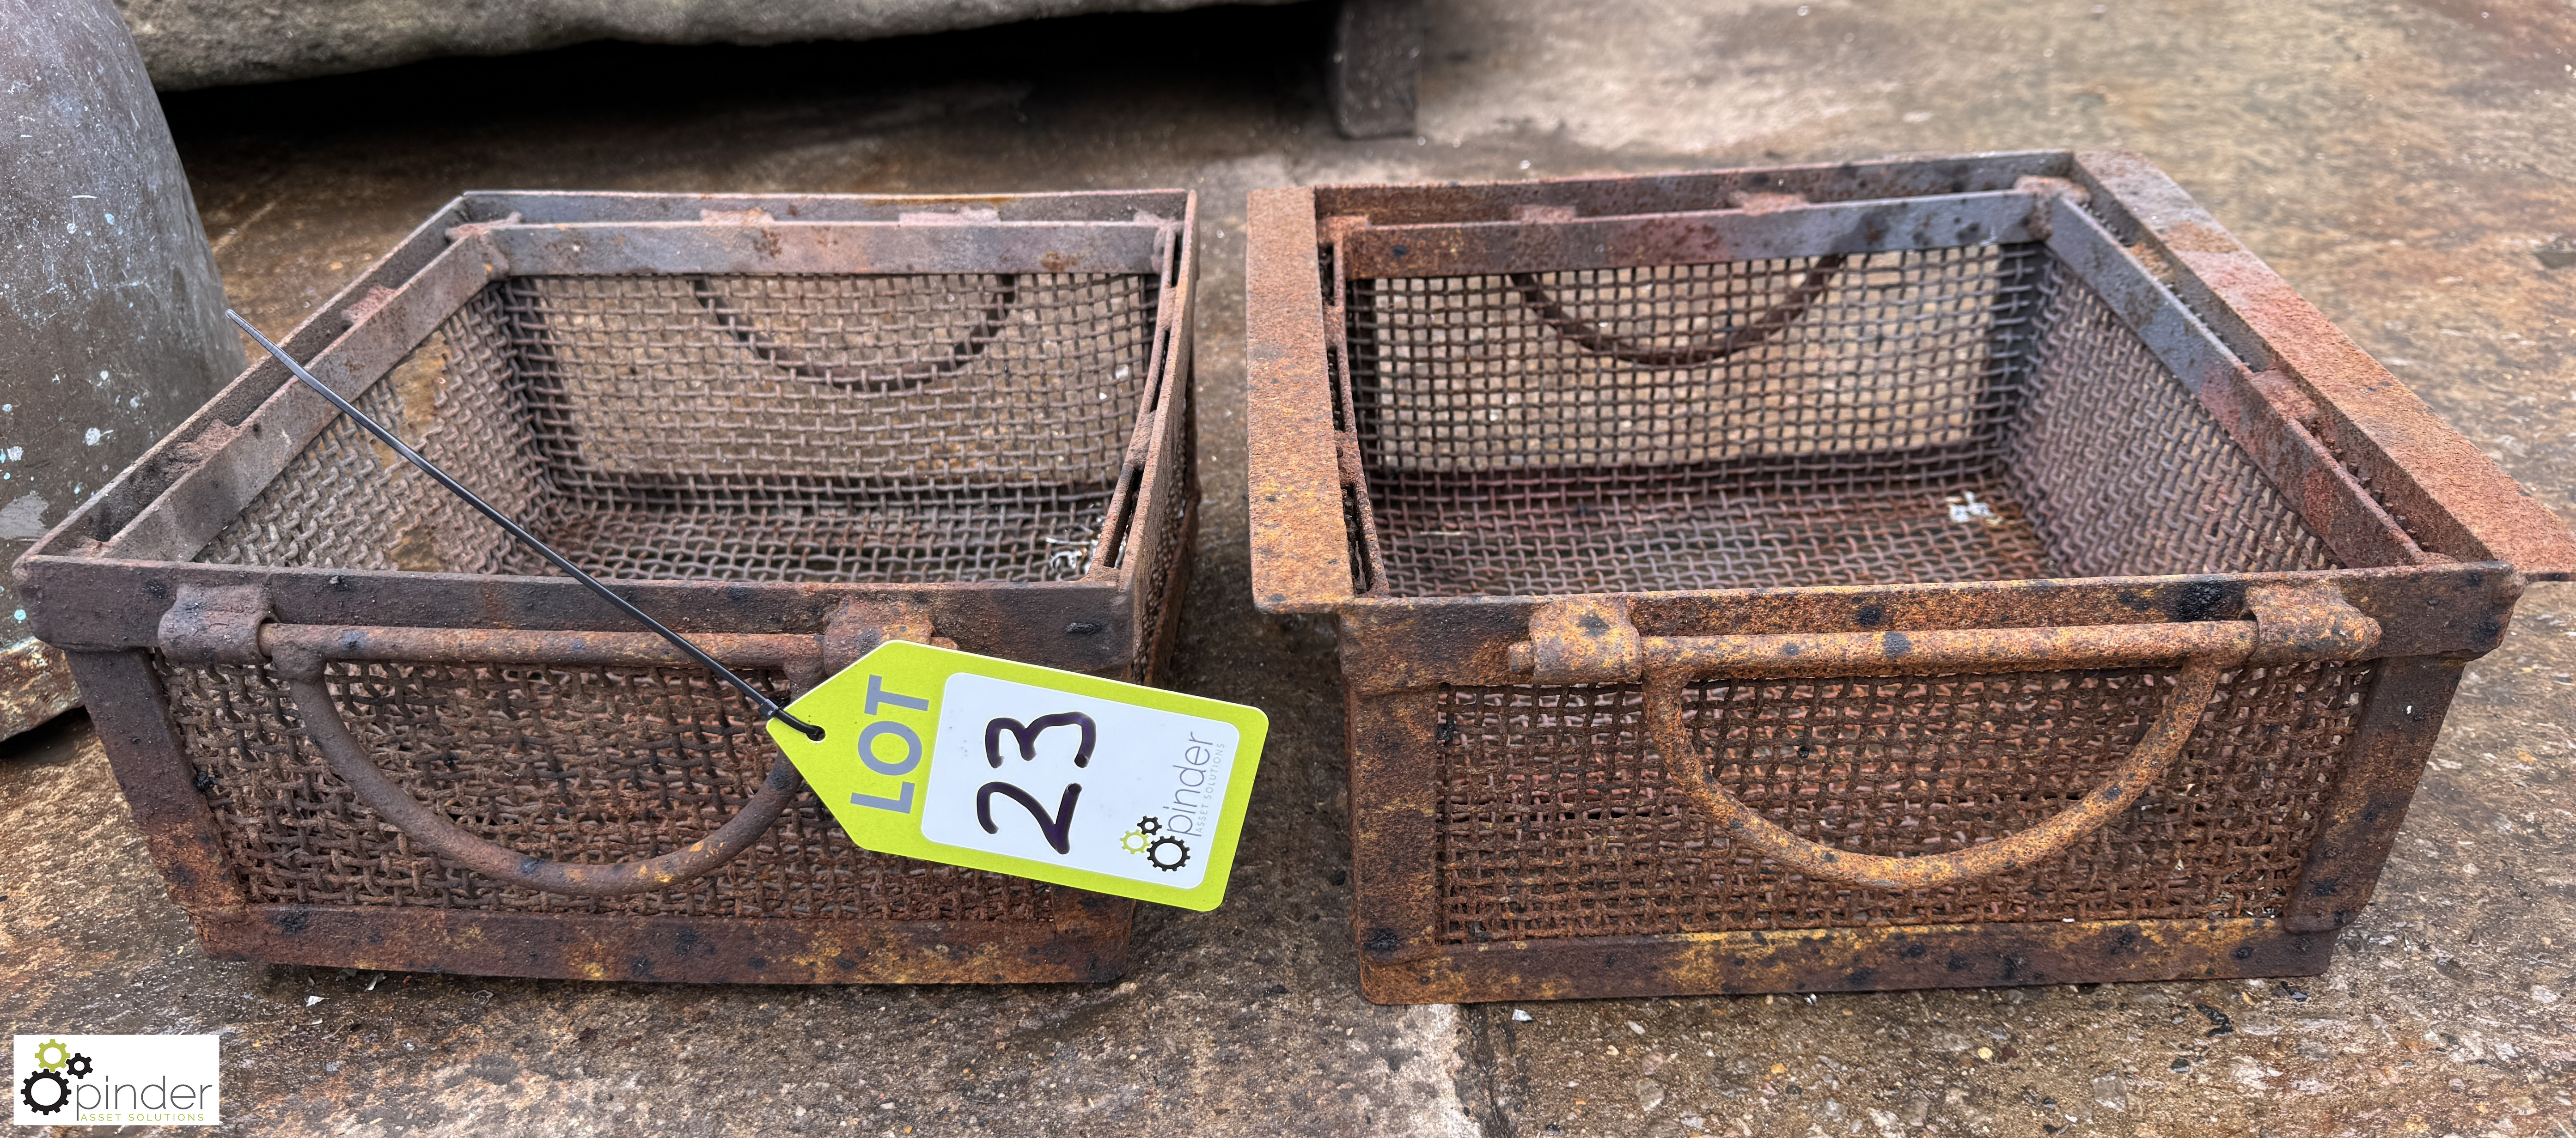 2 vintage metal Treatment Dipping Baskets, 300mm x 300mm x 130mm